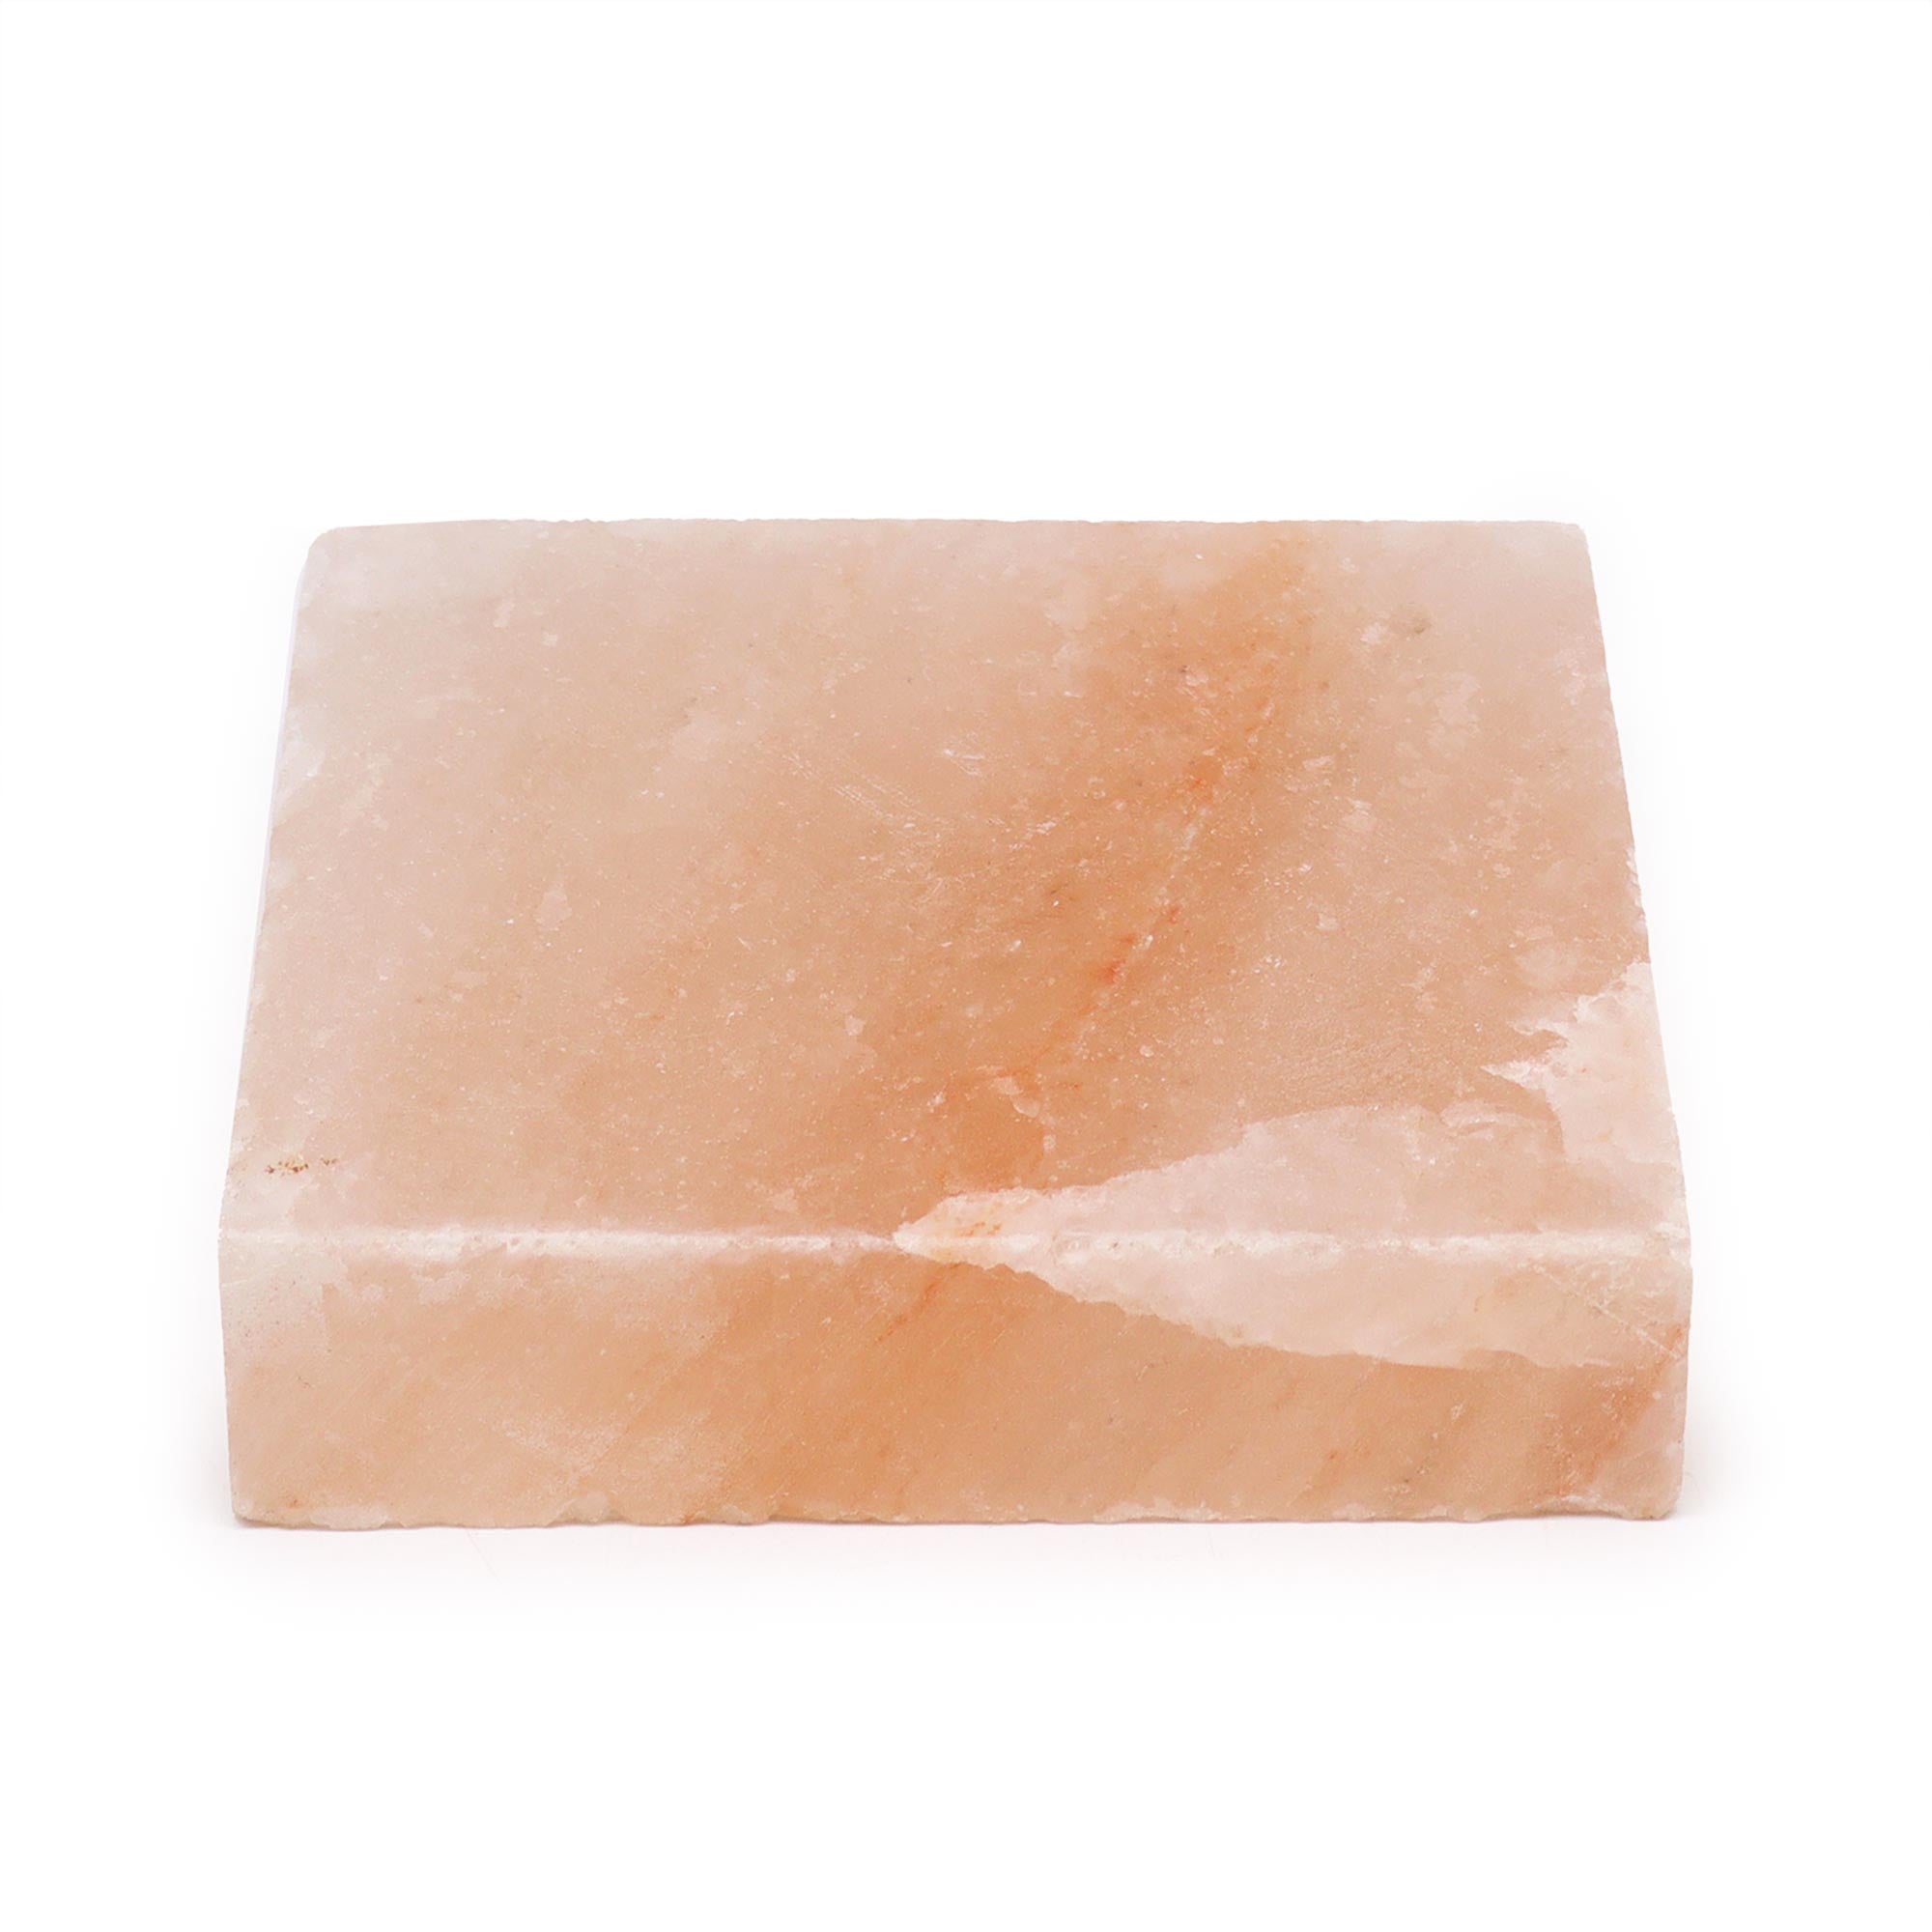 View Himalayan Salt Cooking Plate Square 20x20x5cm information